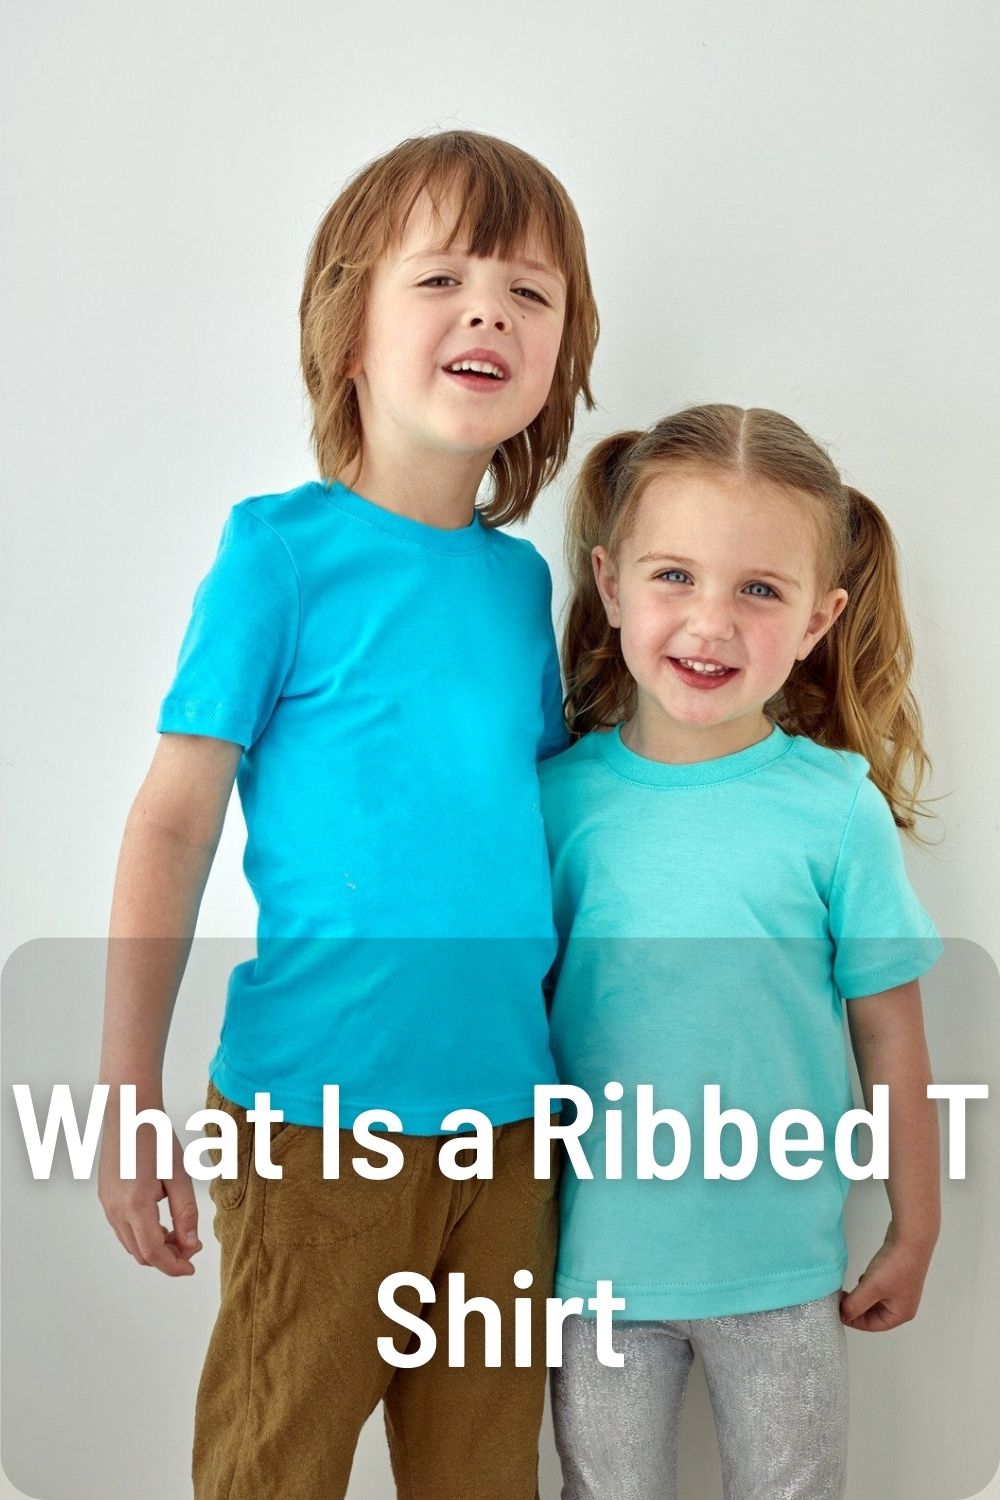 What Is a Ribbed T Shirt